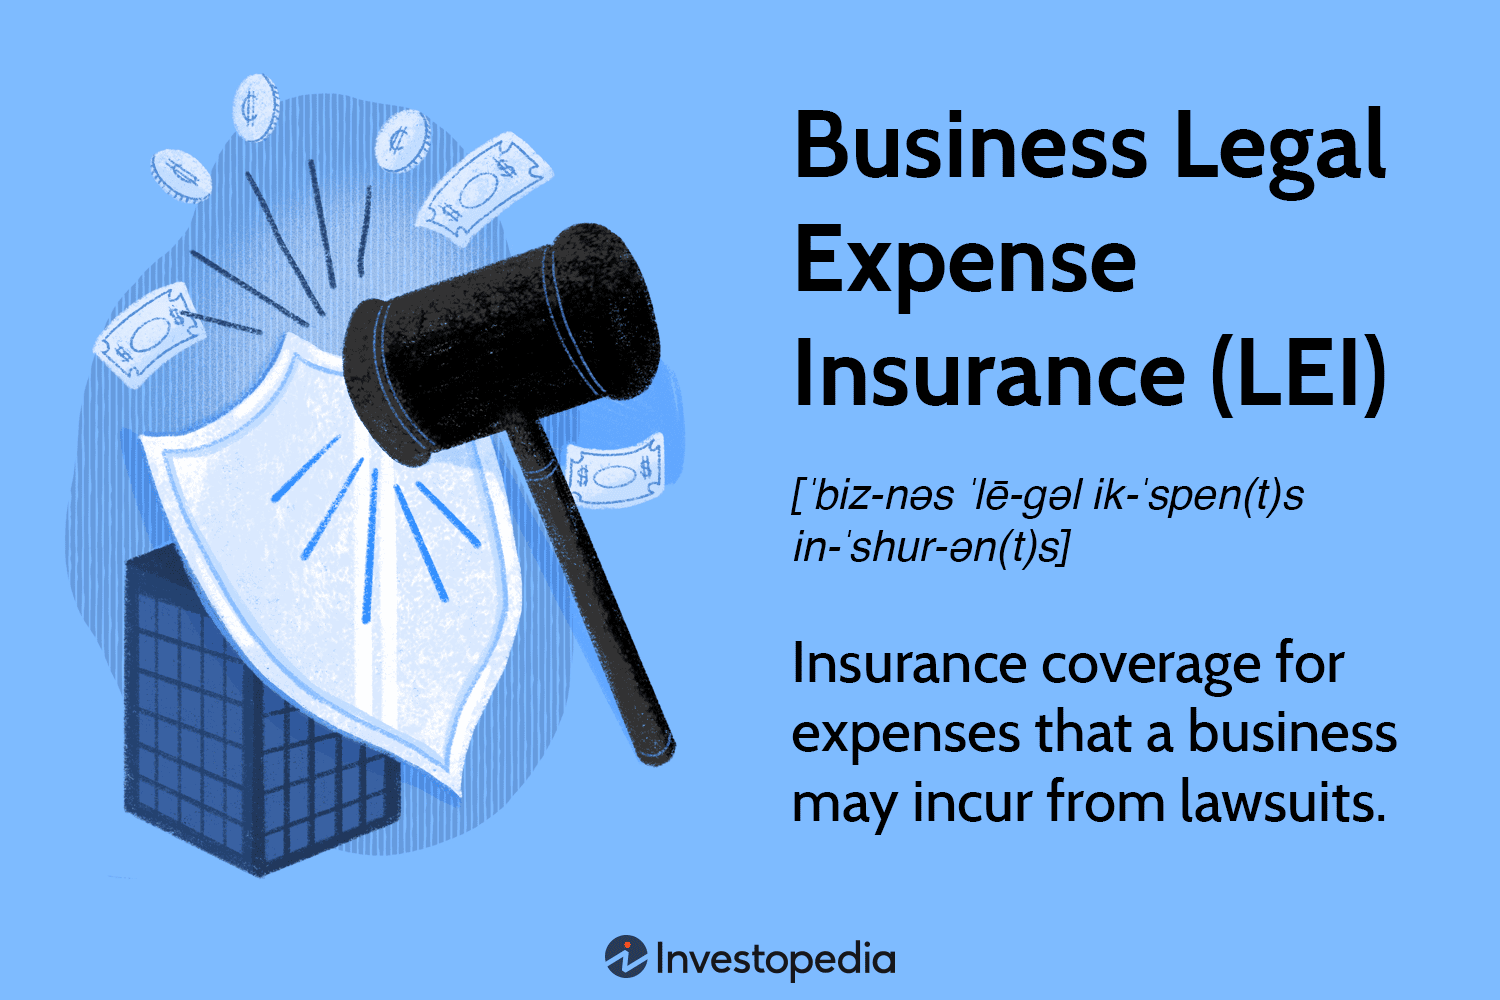 Does business insurance cover lawsuits and legal expenses?